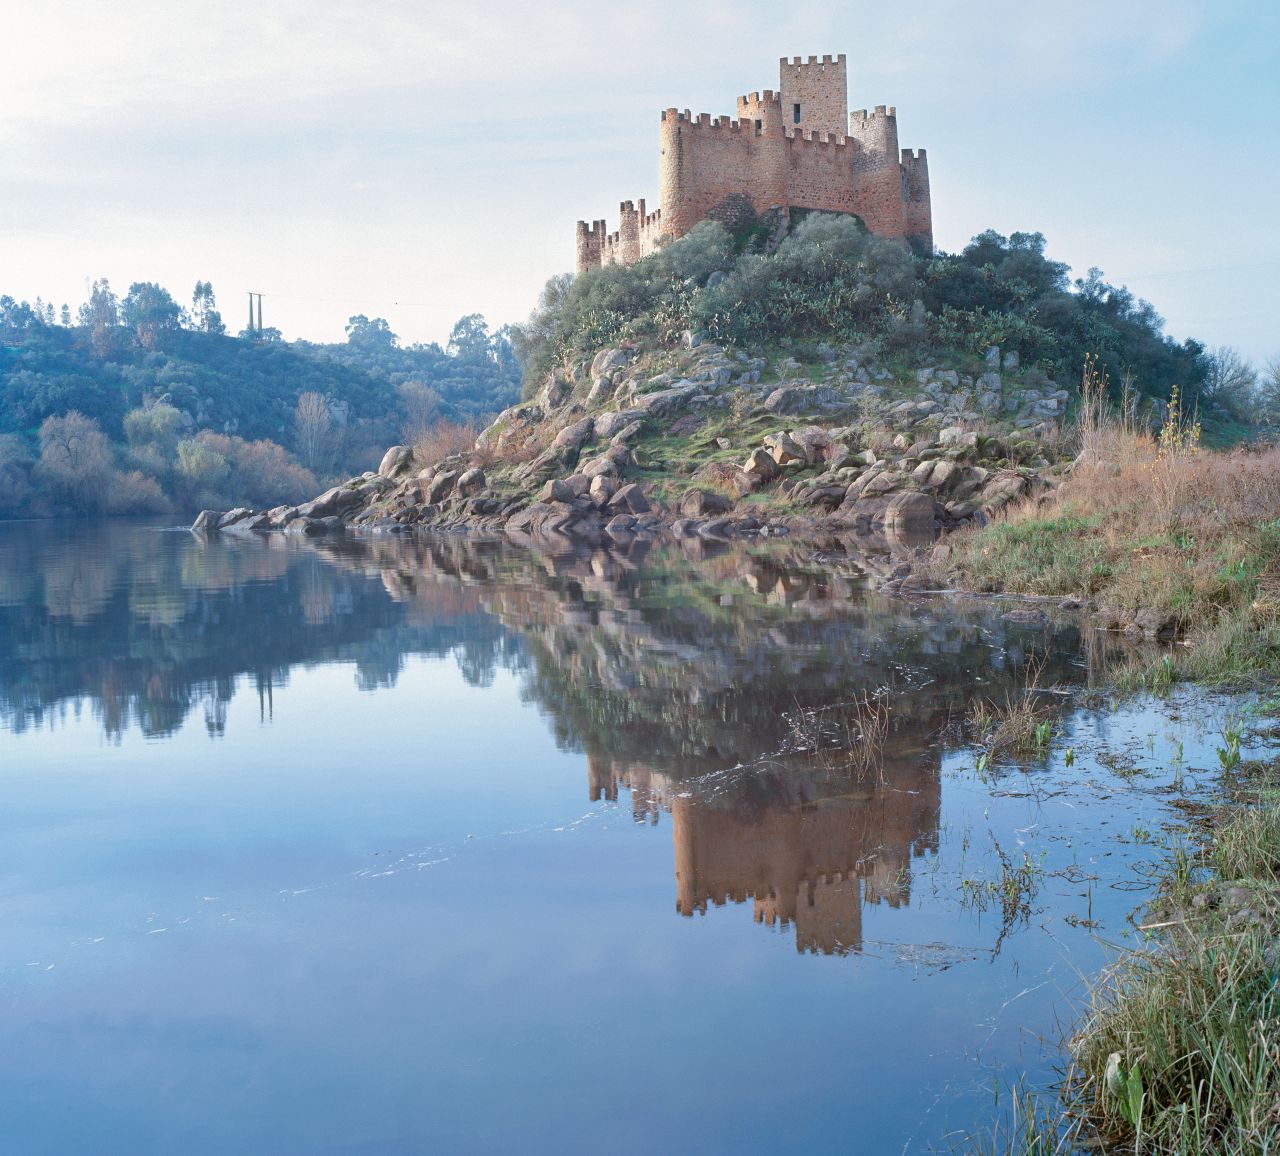 The Romanesque castle of Almourol in Portugal belonged to the order of the Templars, who were very active in bringing Christianity to the Iberian Peninsula. 